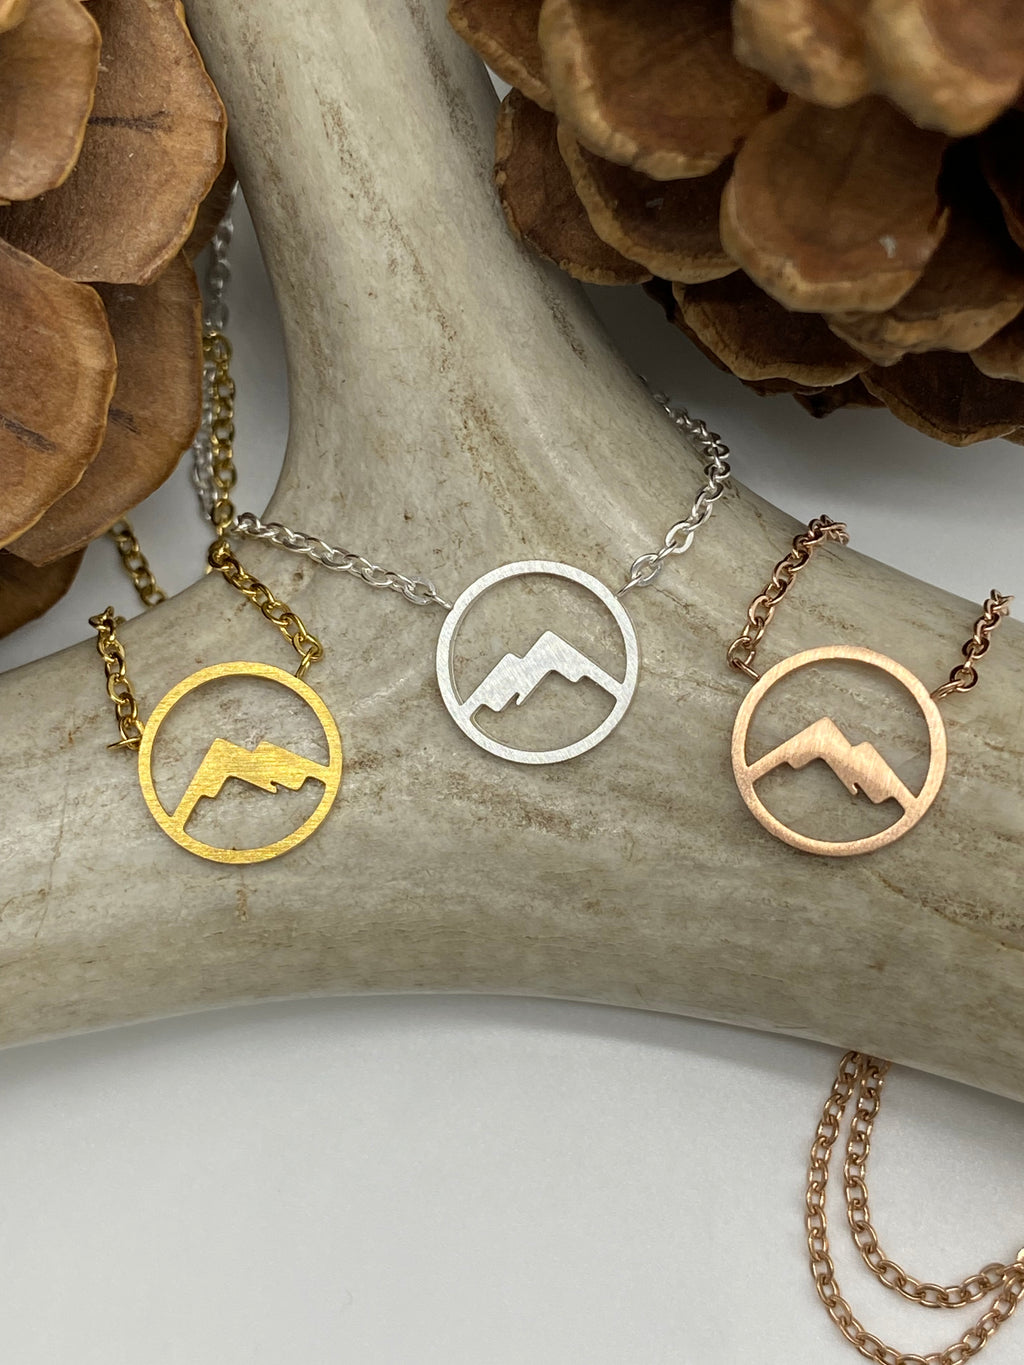 Adjustable mini circle mountain necklace made from waterproof stainless steel, available in gold, silver, rose gold.  